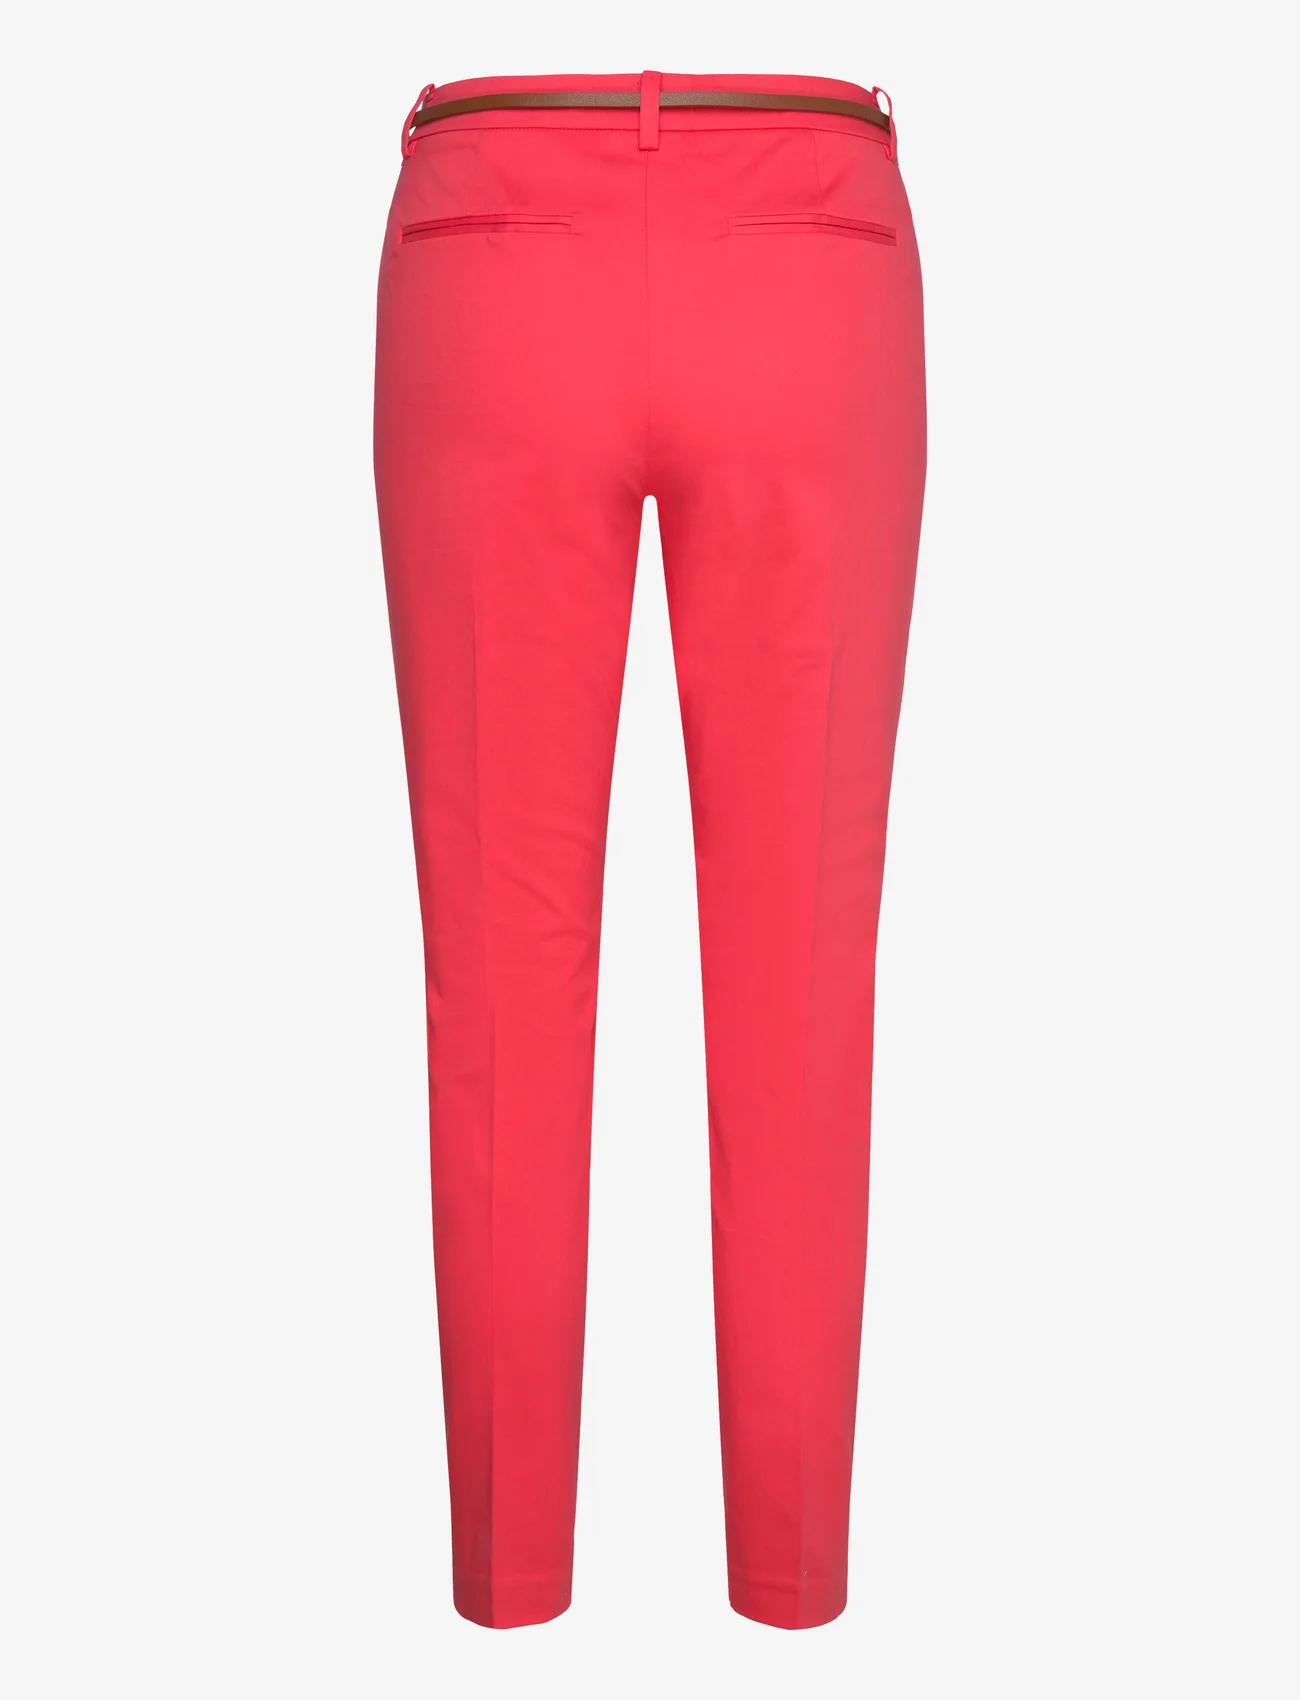 b.young - BYDAYS CIGARET PANTS 2 - - juhlamuotia outlet-hintaan - cayenne - 1